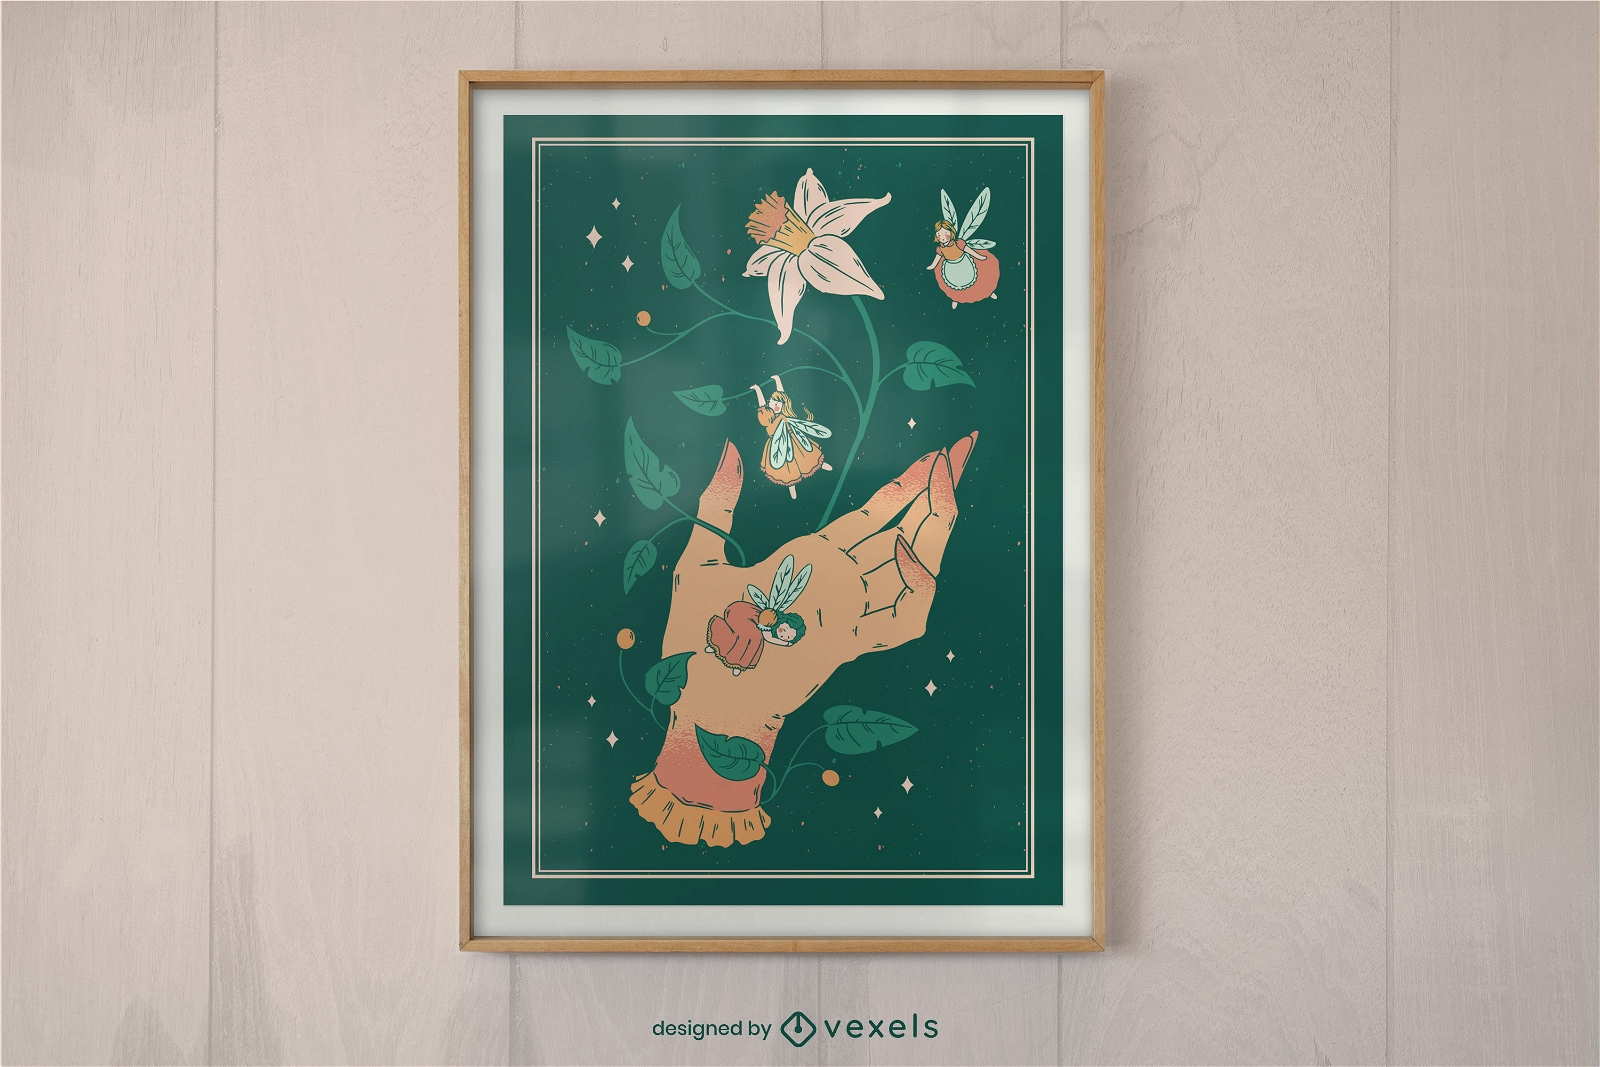 Hand with little fairies poster design